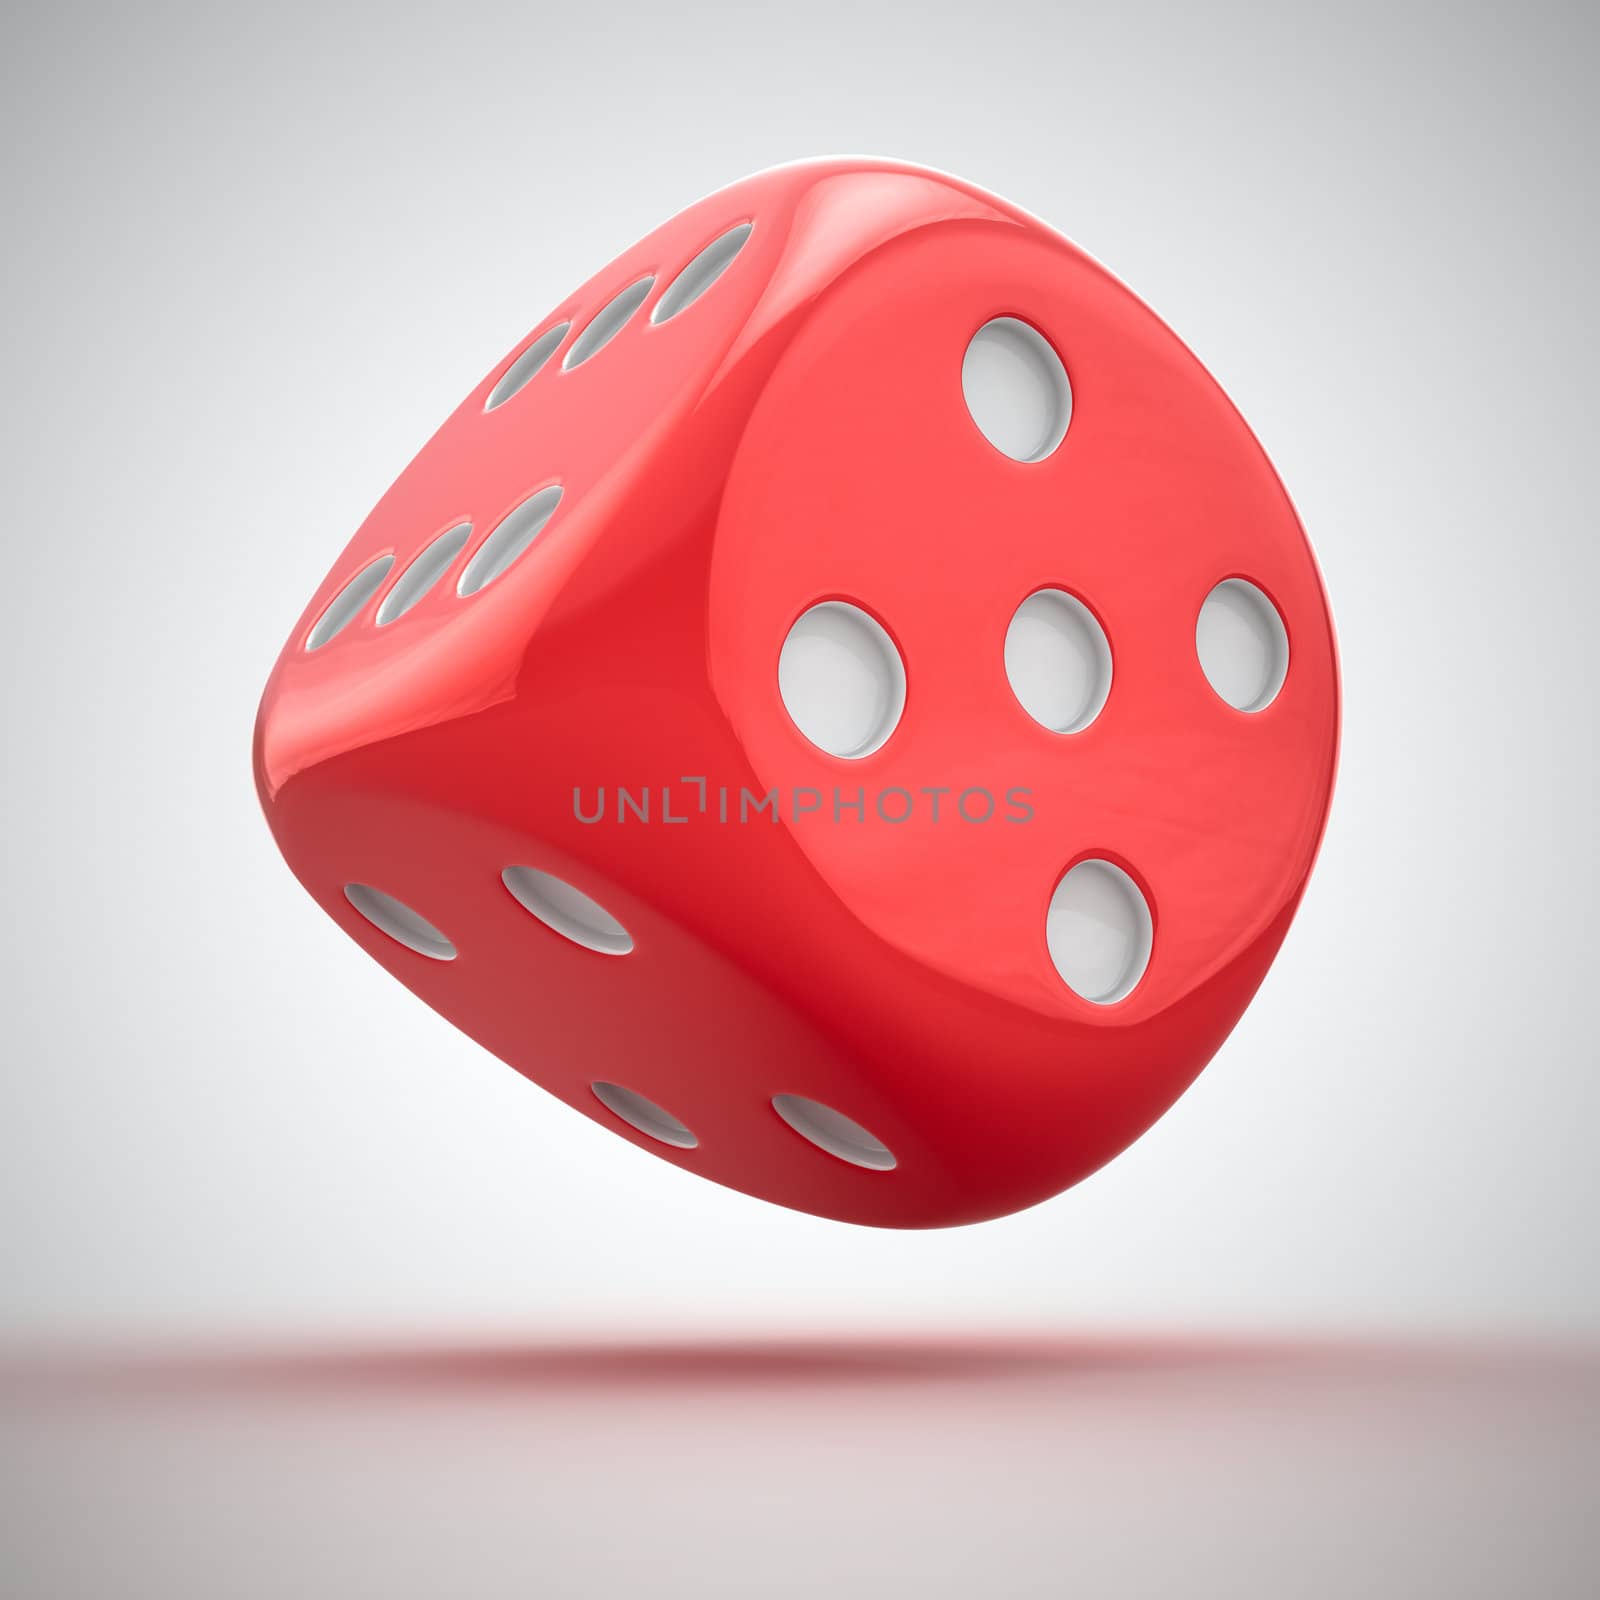 Red dice by timbrk